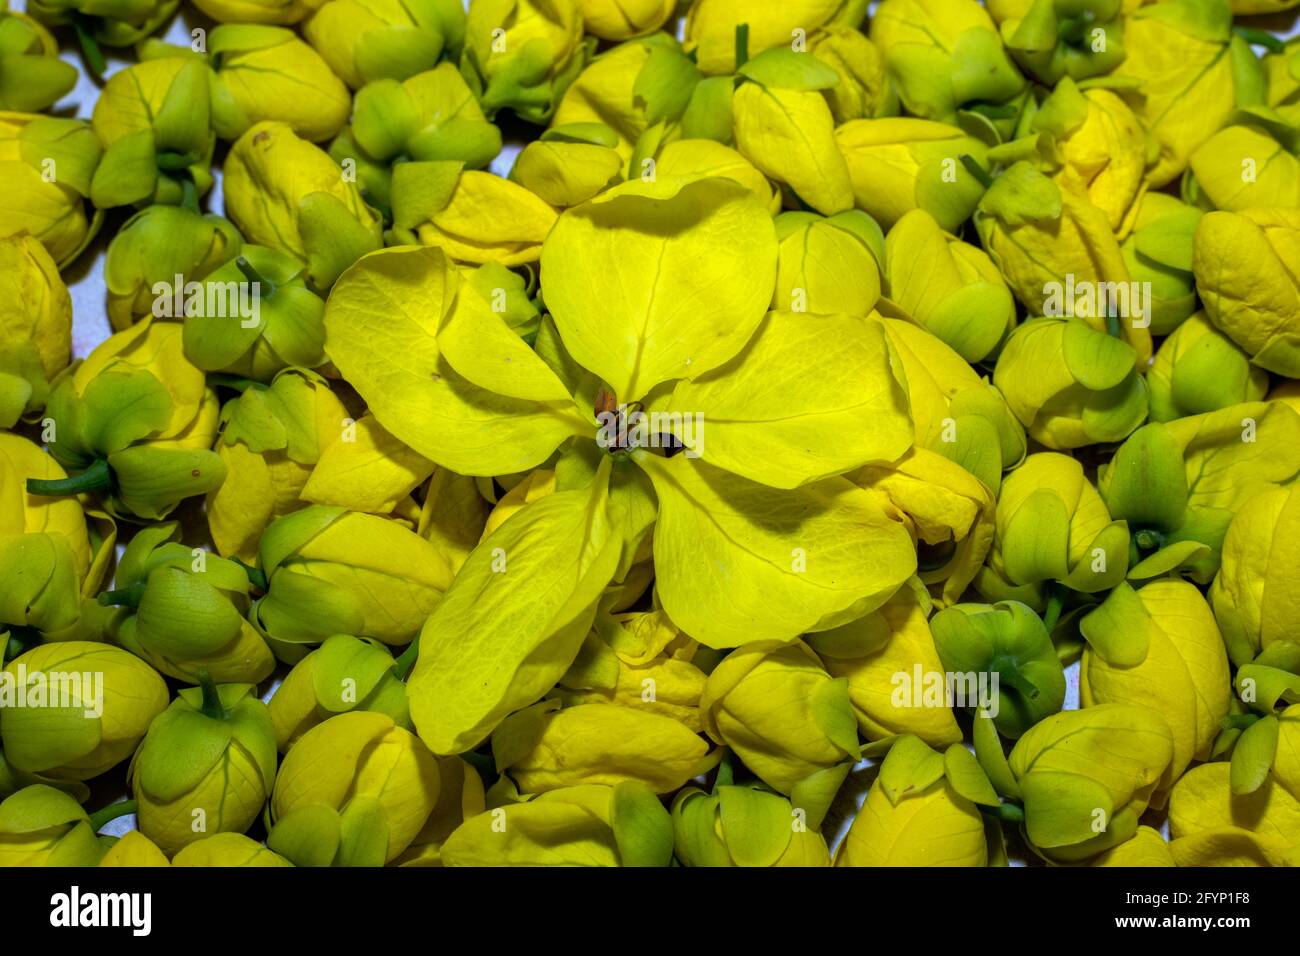 Indian-laburnum or Golden shower tree that commonly known as golden shower, purging cassia or pudding-pipe tree, is a flowering plant in the subfamily Stock Photo